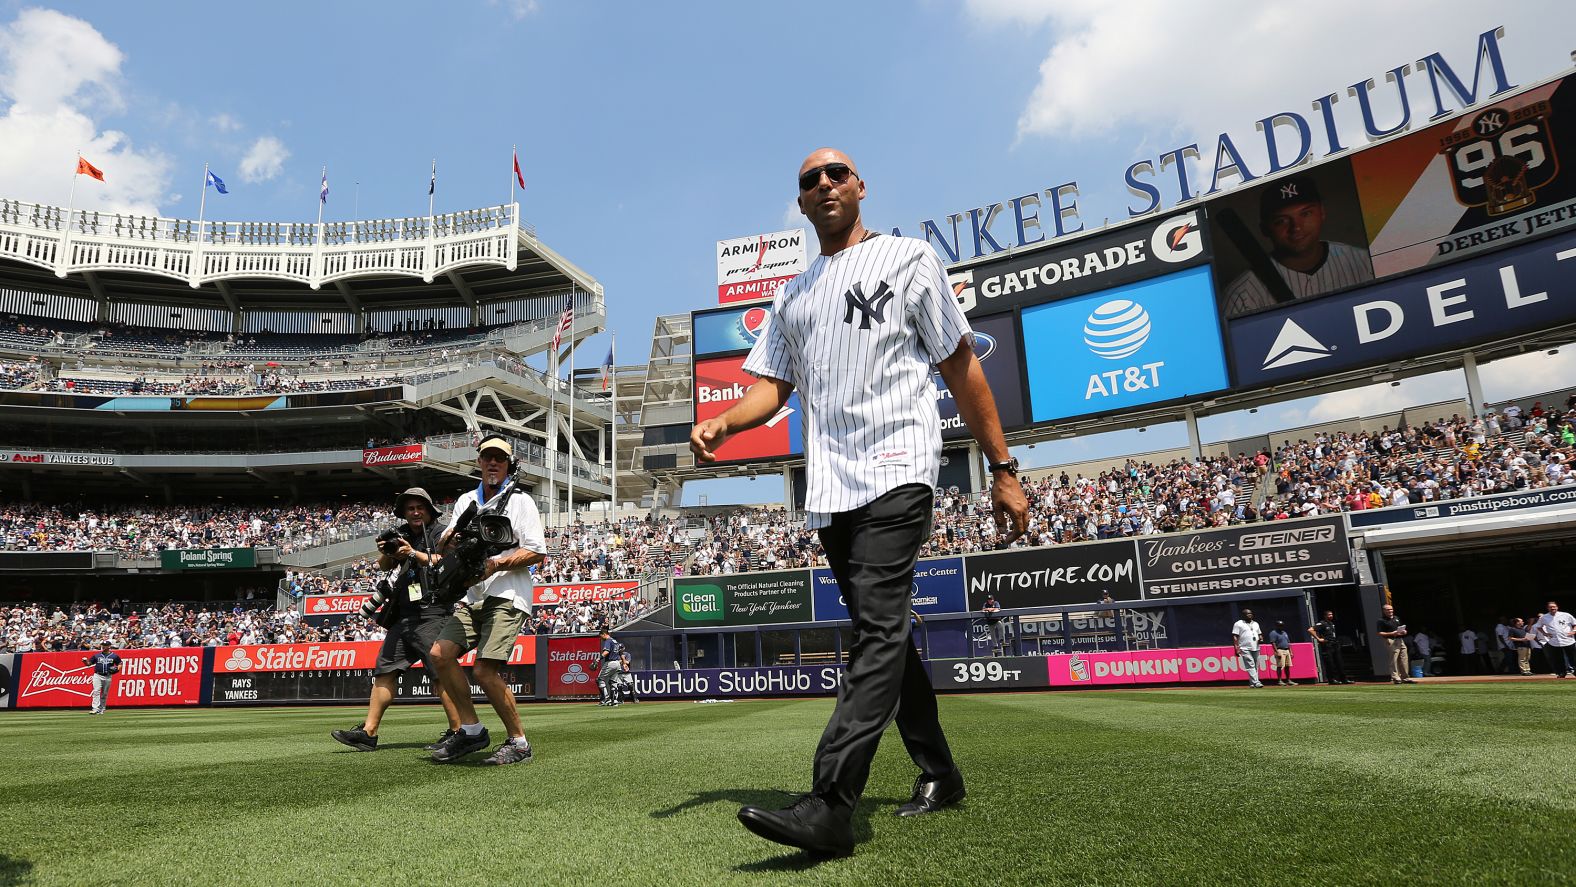 In August 2016, Jeter is introduced during a Yankees ceremony honoring the 1996 championship team.